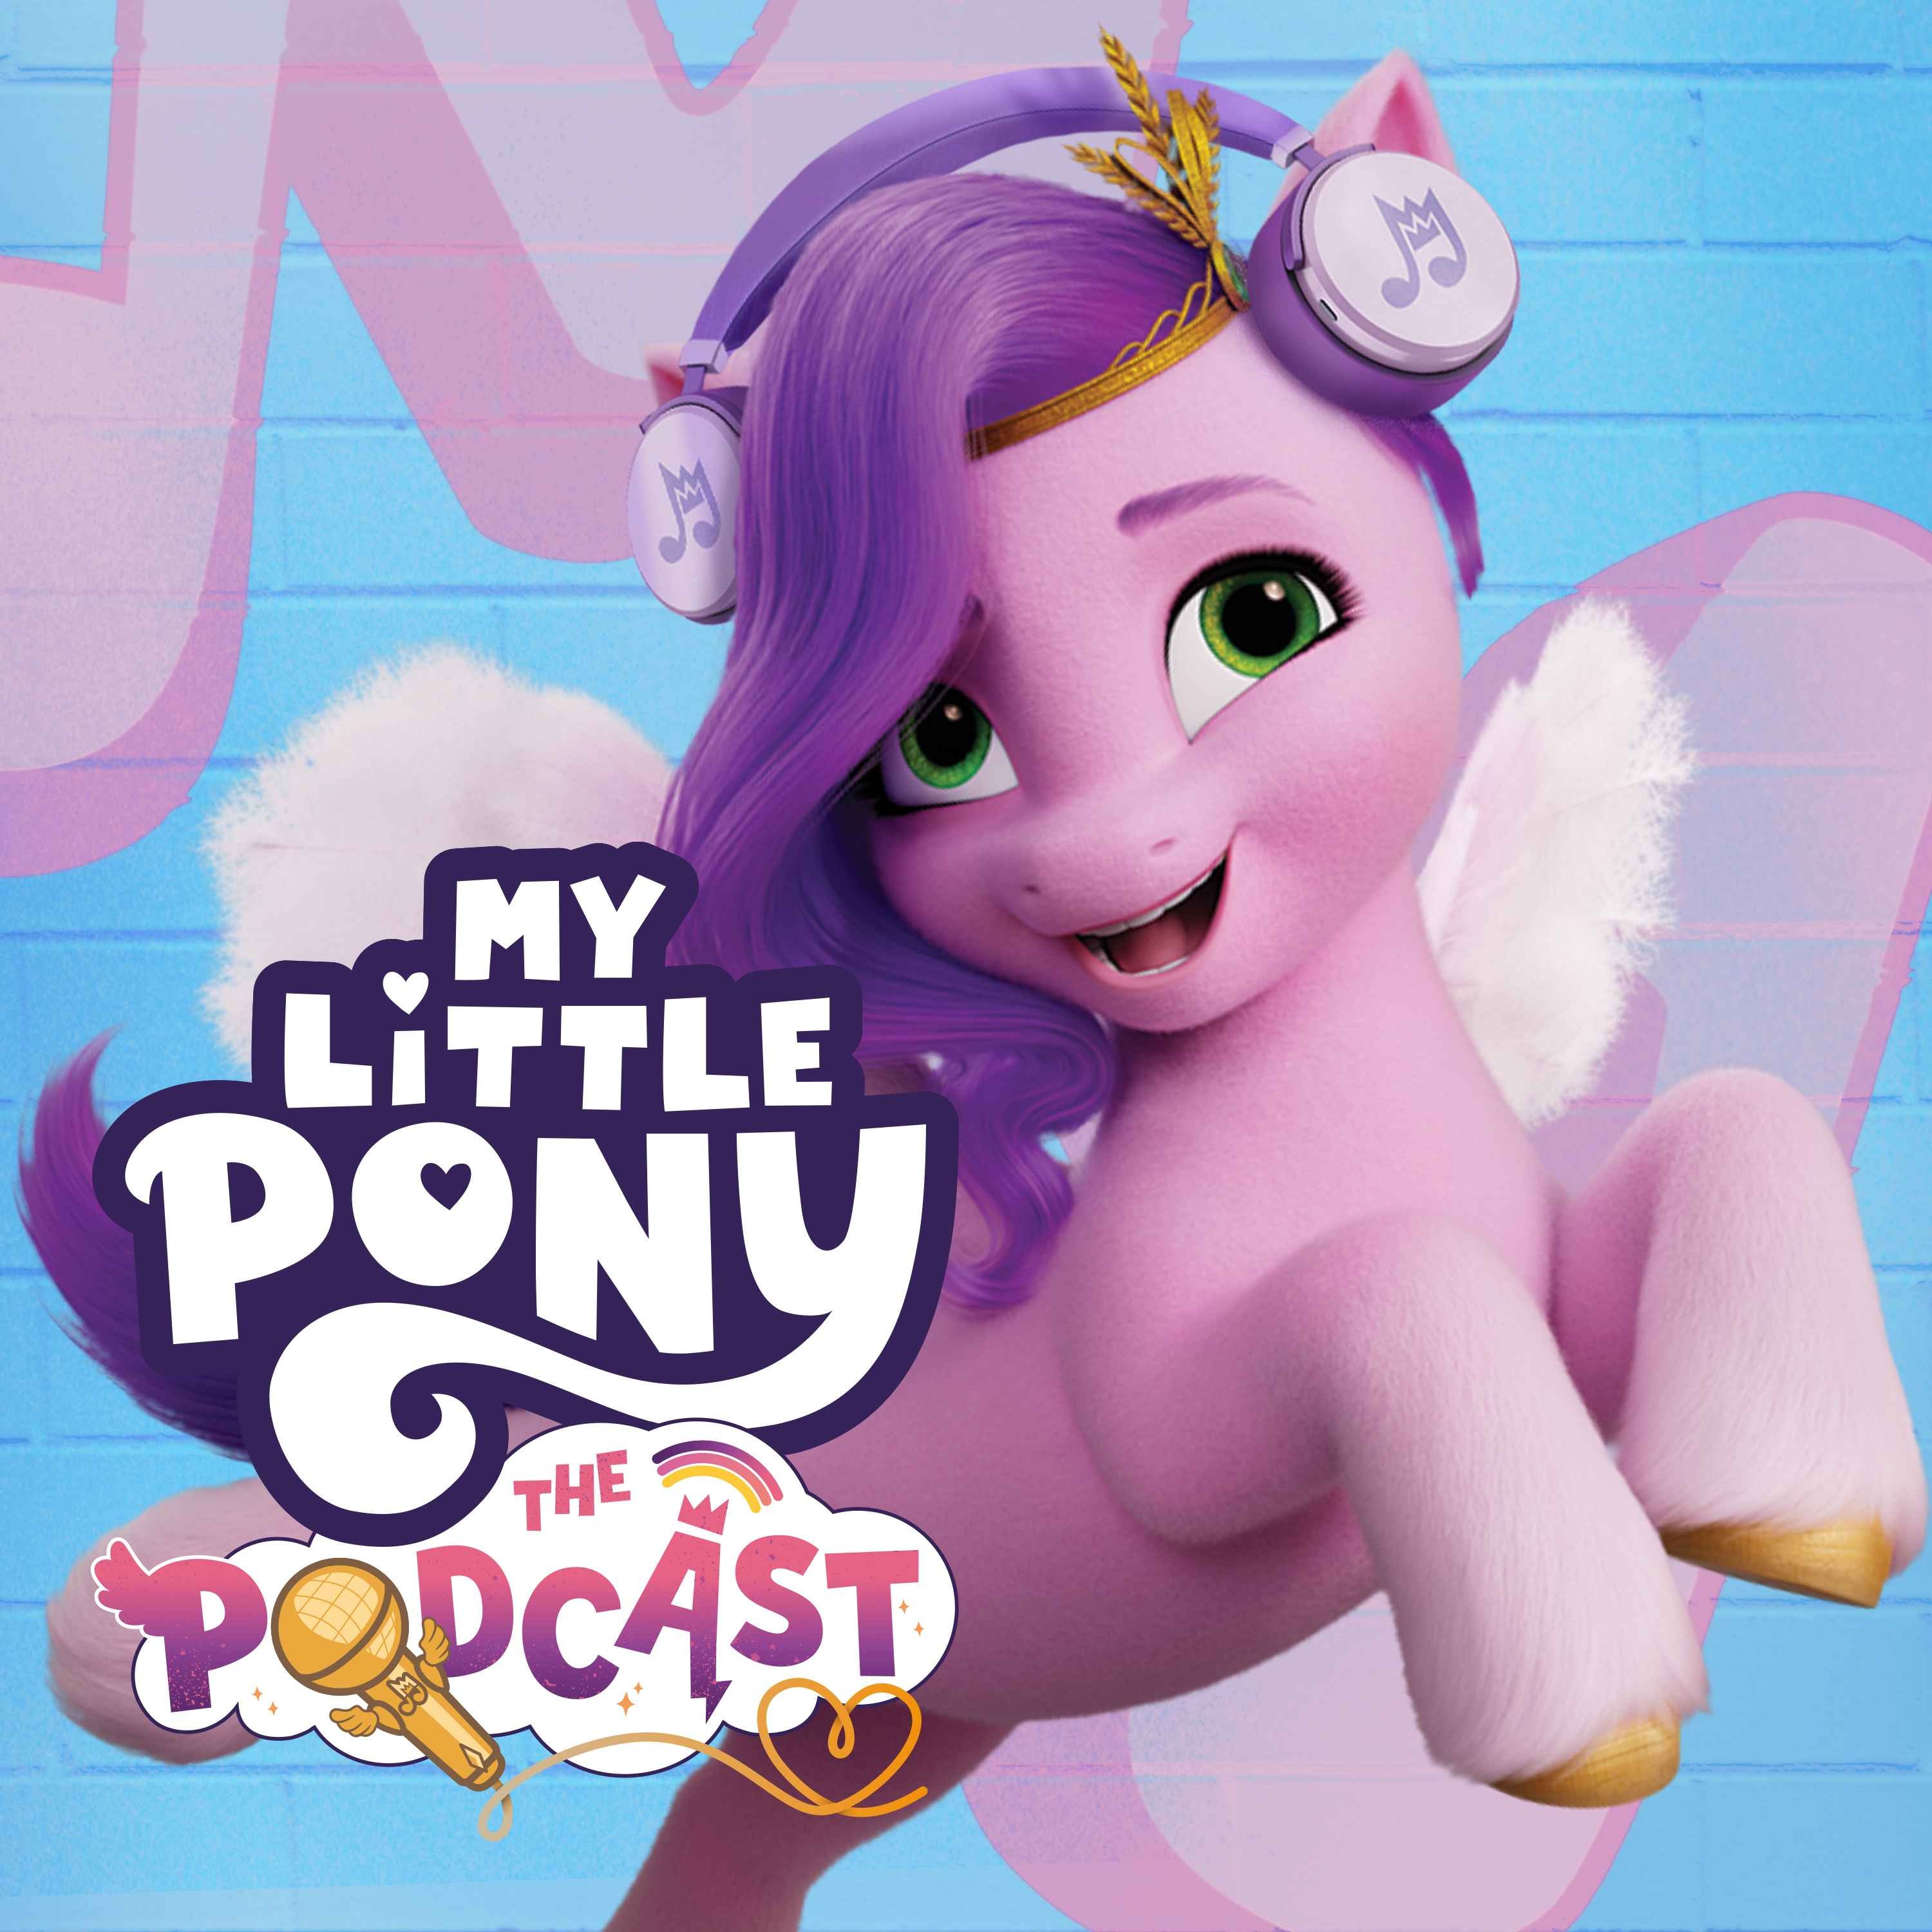 My Little Pony: The Podcast - Hosted by My Little Pony